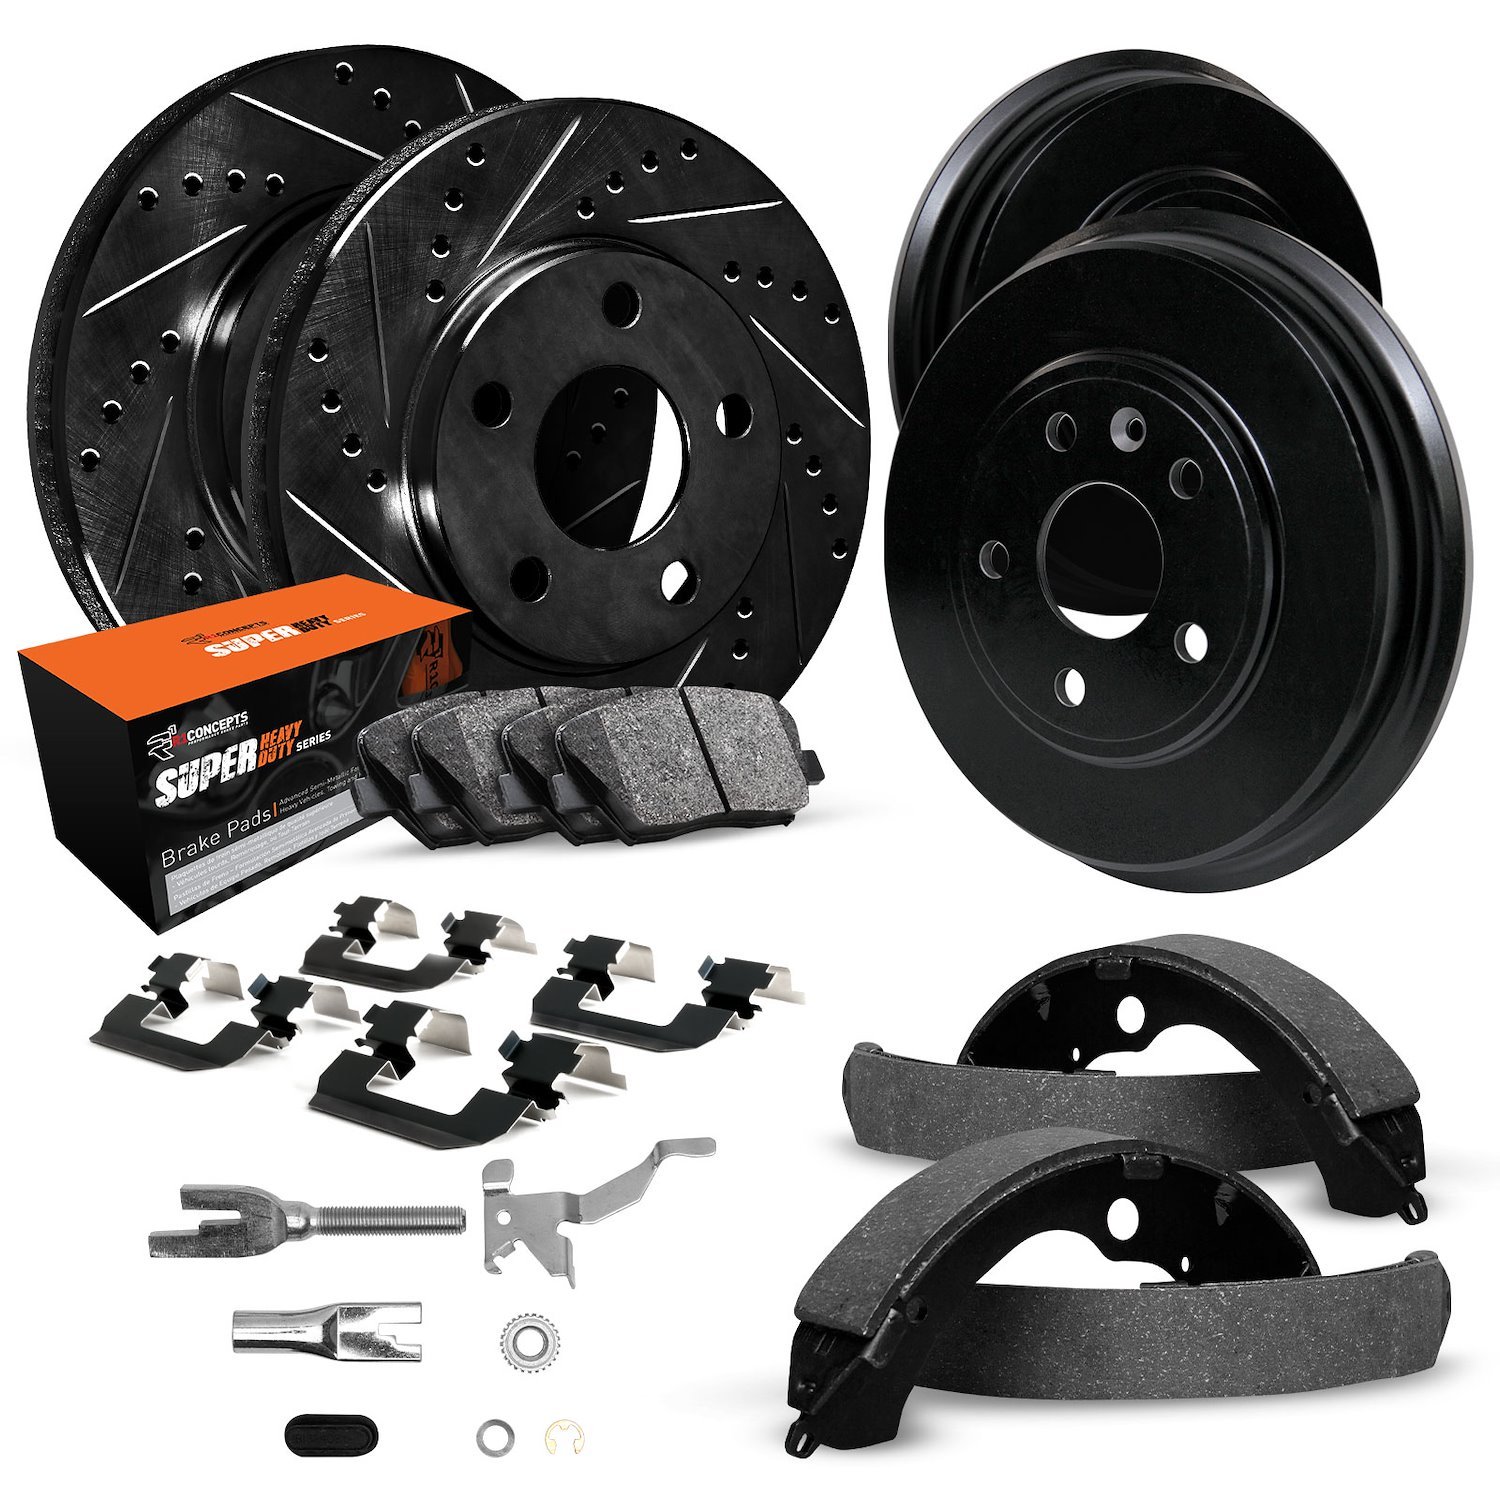 E-Line Slotted Black Brake Rotor & Drum Set w/Super-Duty Pads, Shoes, Hardware/Adjusters, 1983-1989 Ford/Lincoln/Mercury/Mazda